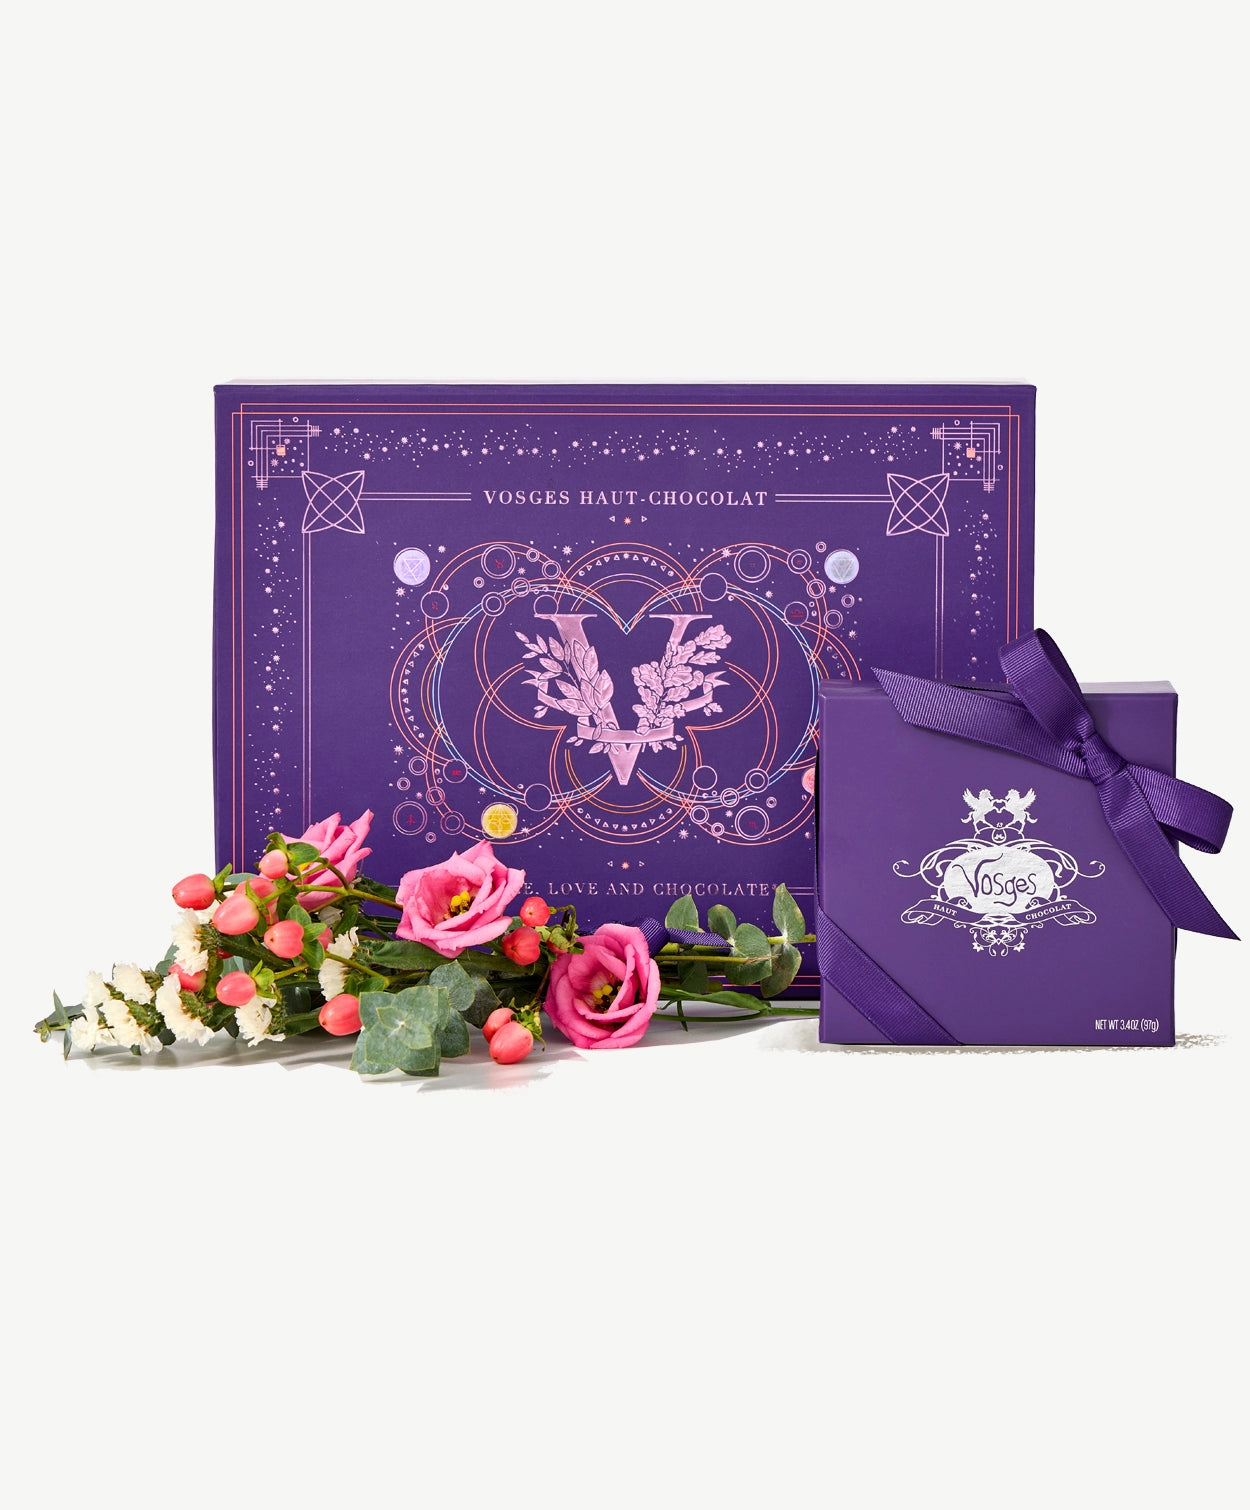 A bouquet of pink flowers sit beside two ornately decorate purple Vosges chocolate boxes on a light grey background.